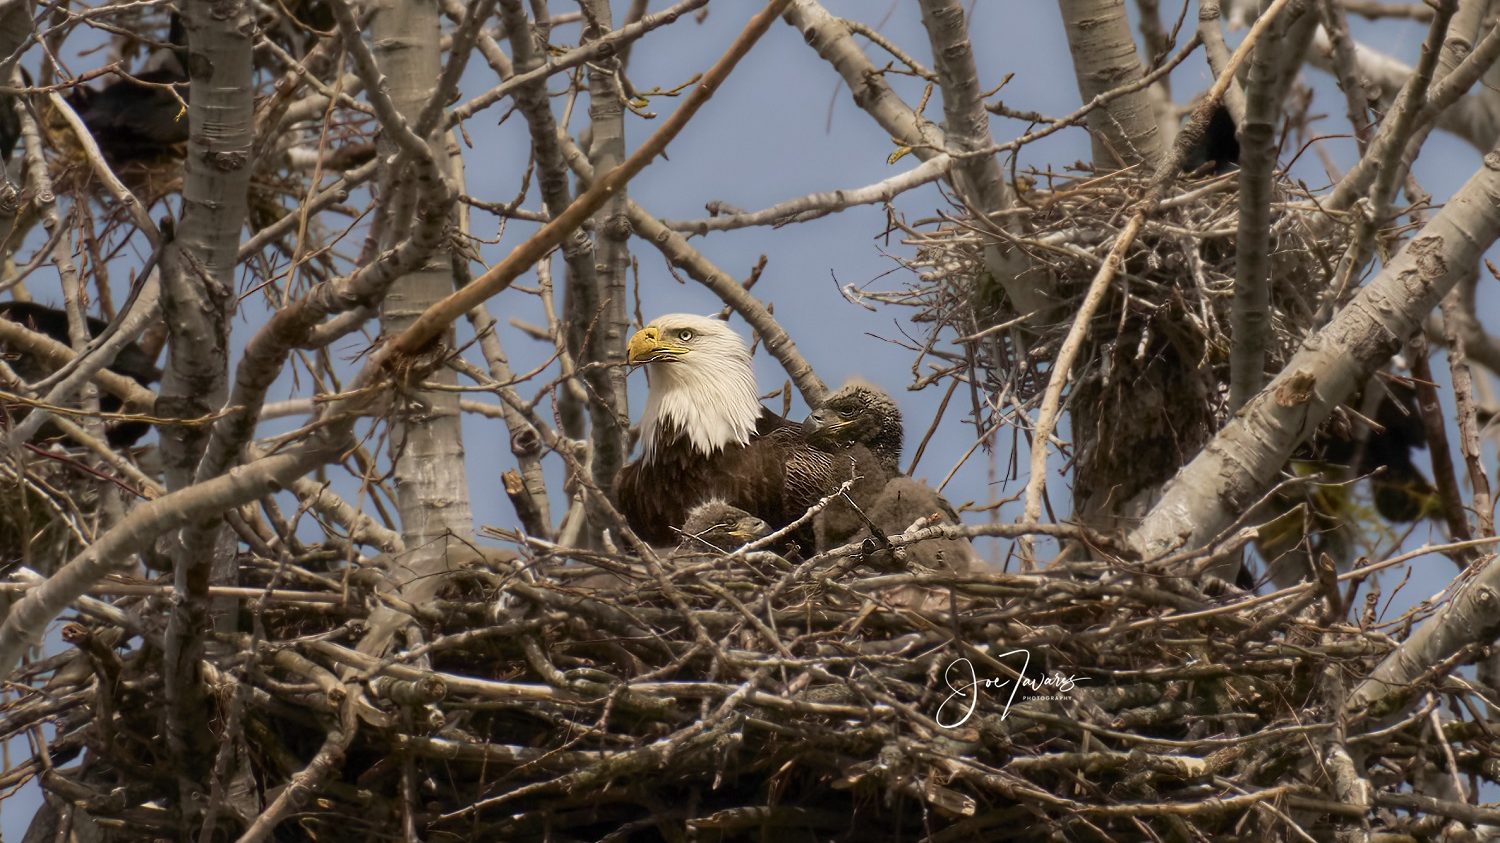 ‘History in the making’: Two eaglets spotted at first documented bald eagle nest in Toronto